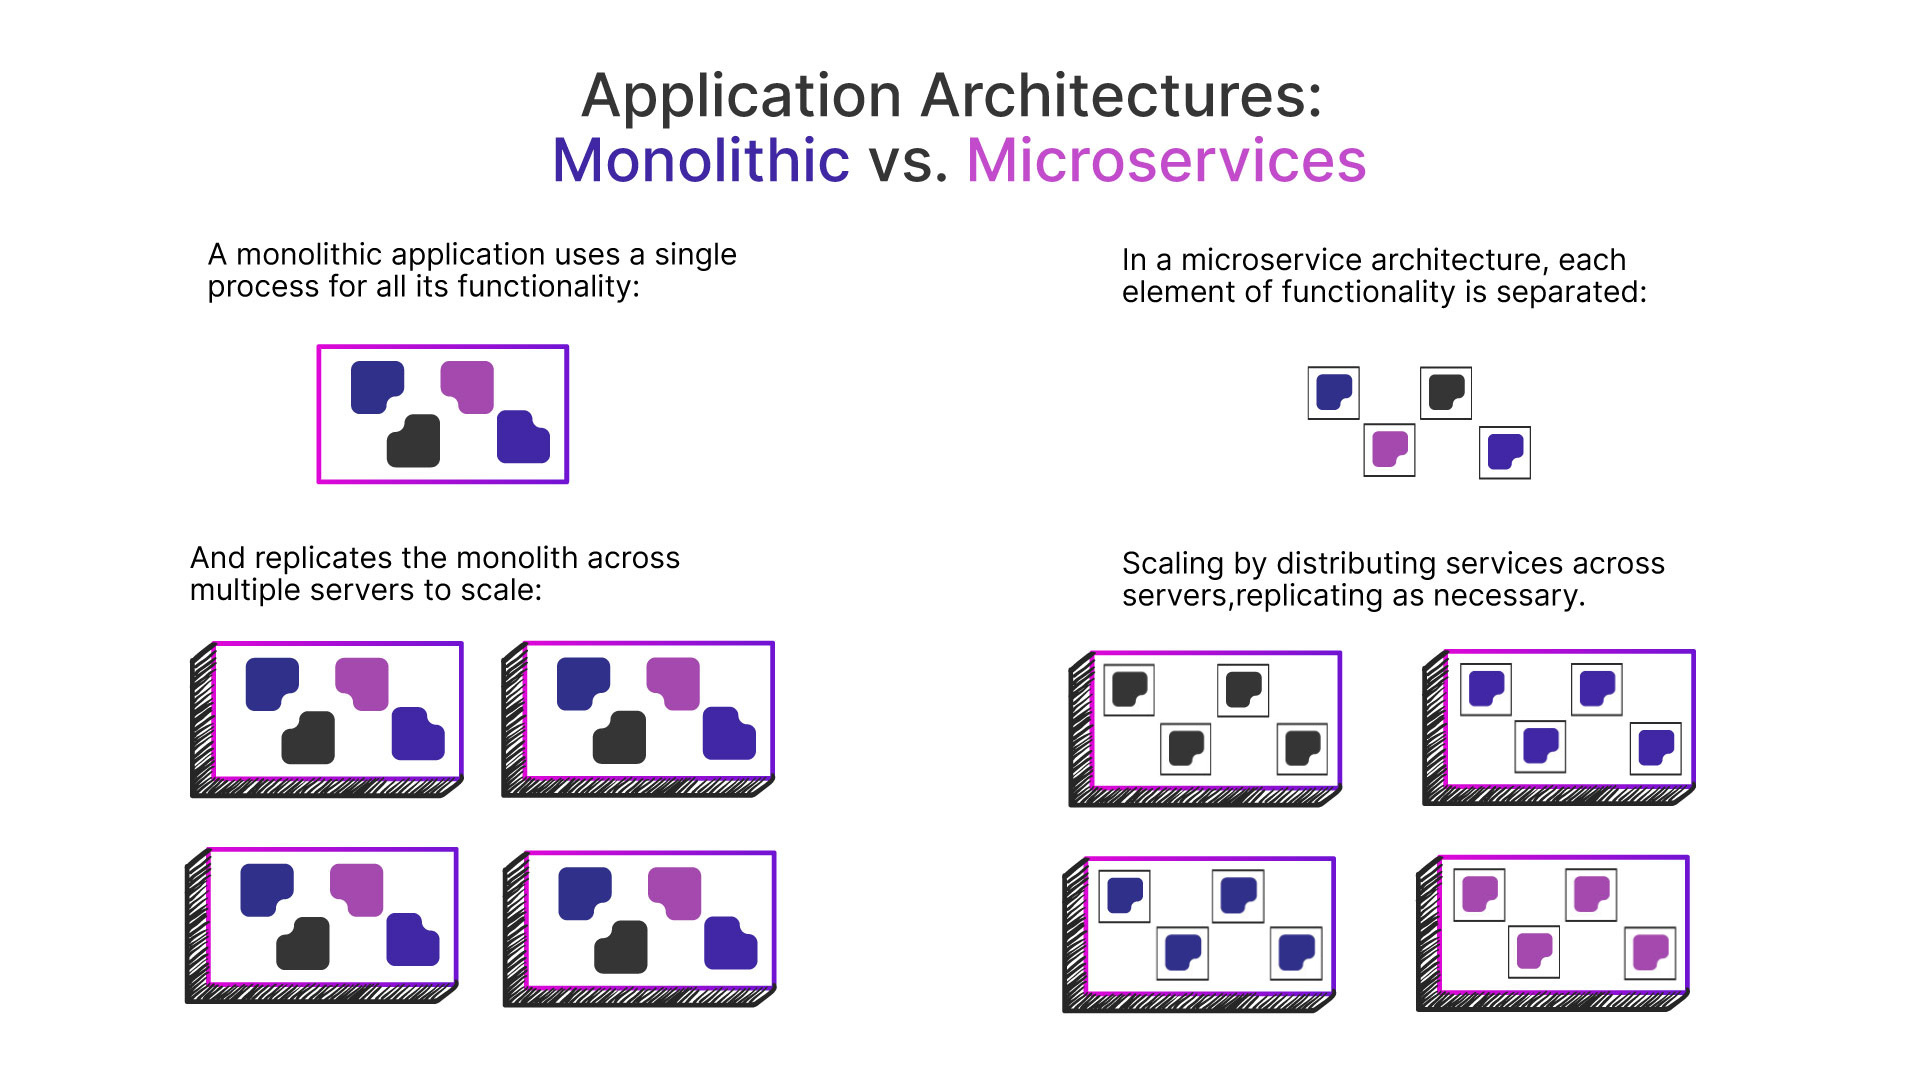 An illustration showing how monolithic applications and microservices architecture vary in their design and ability to scale.